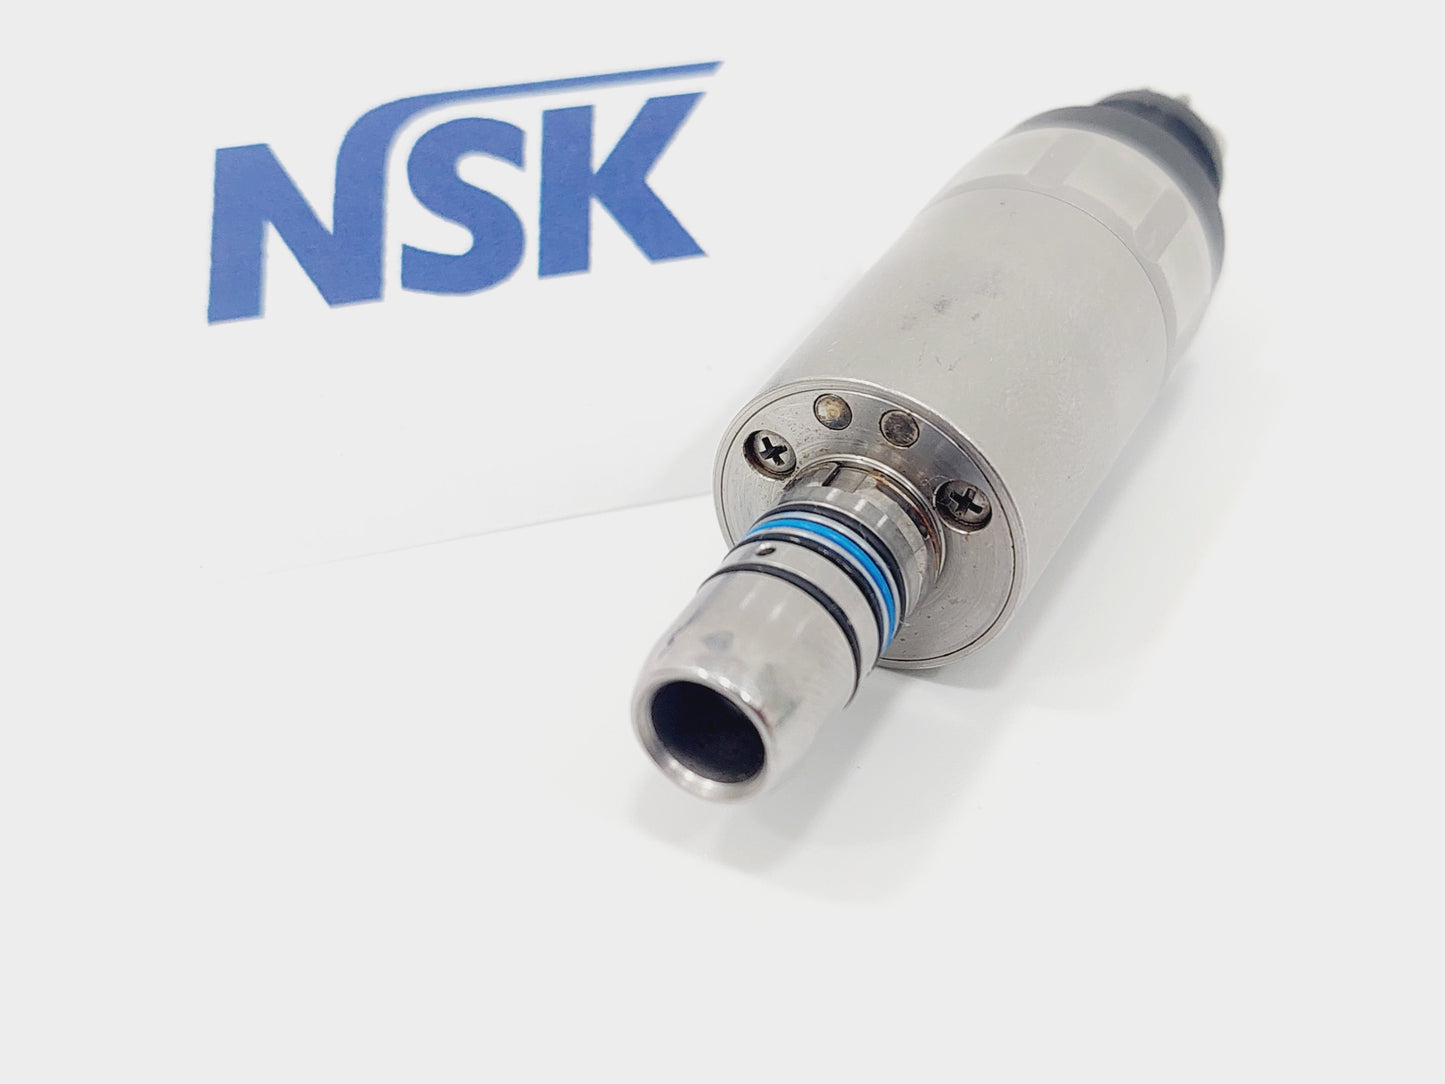 NSK S max M205  Luftmotor